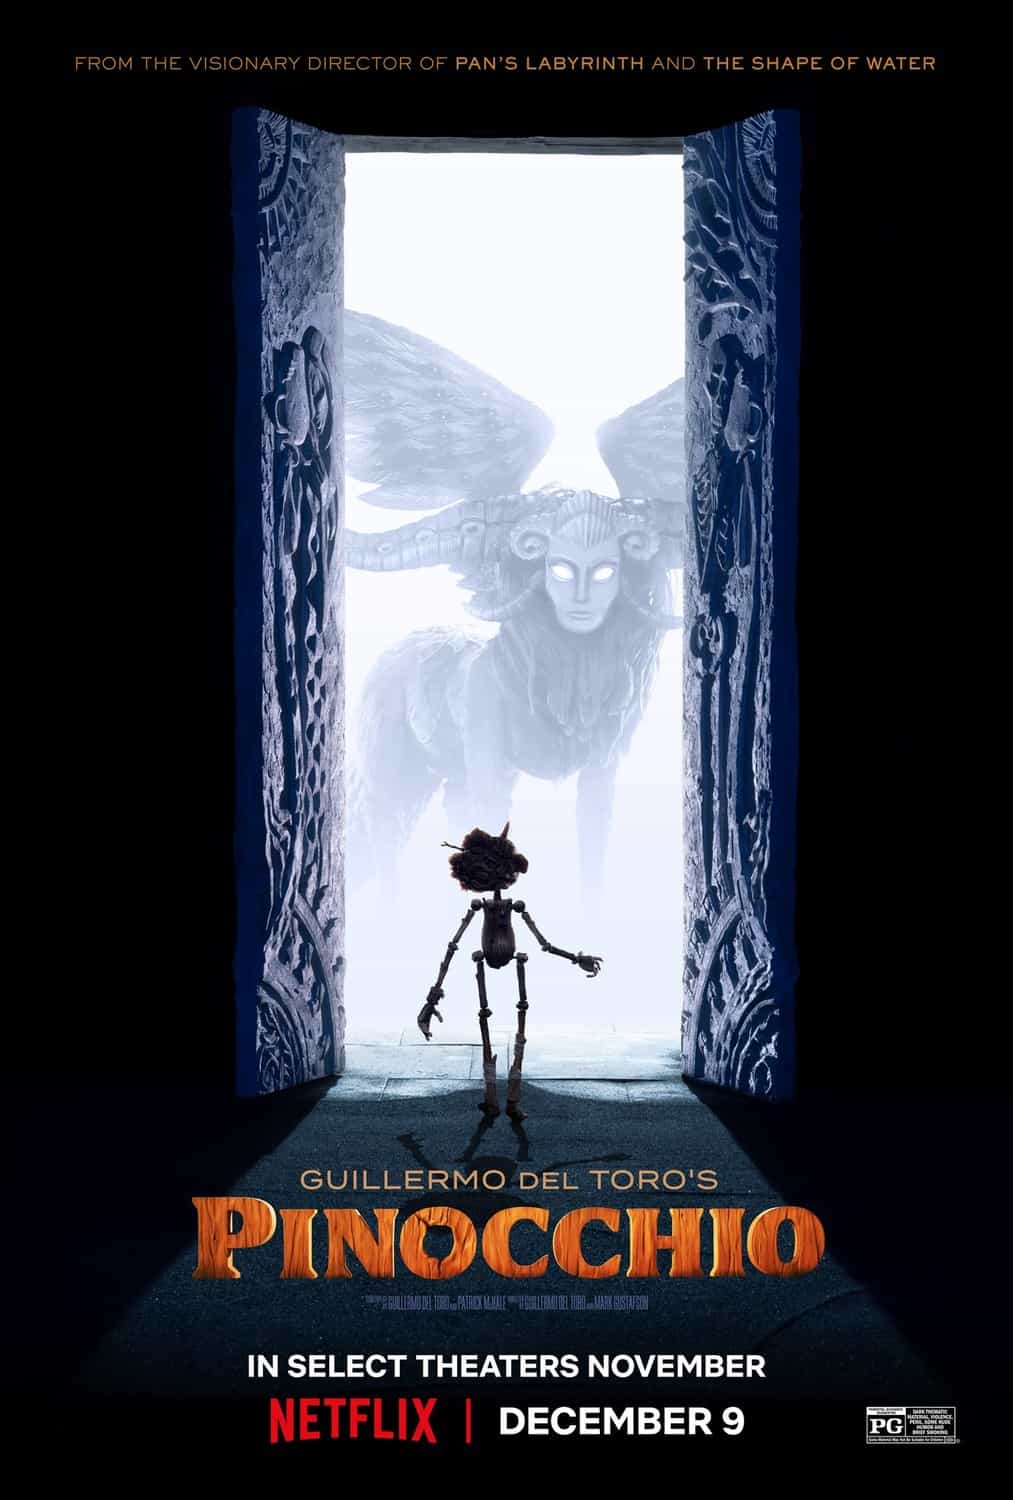 New trailer and poster released for Guillermo Del Toros Pinocchio starring Cate Blanchett - Movie is set for release in 2022 #guillermodeltorospinocchio